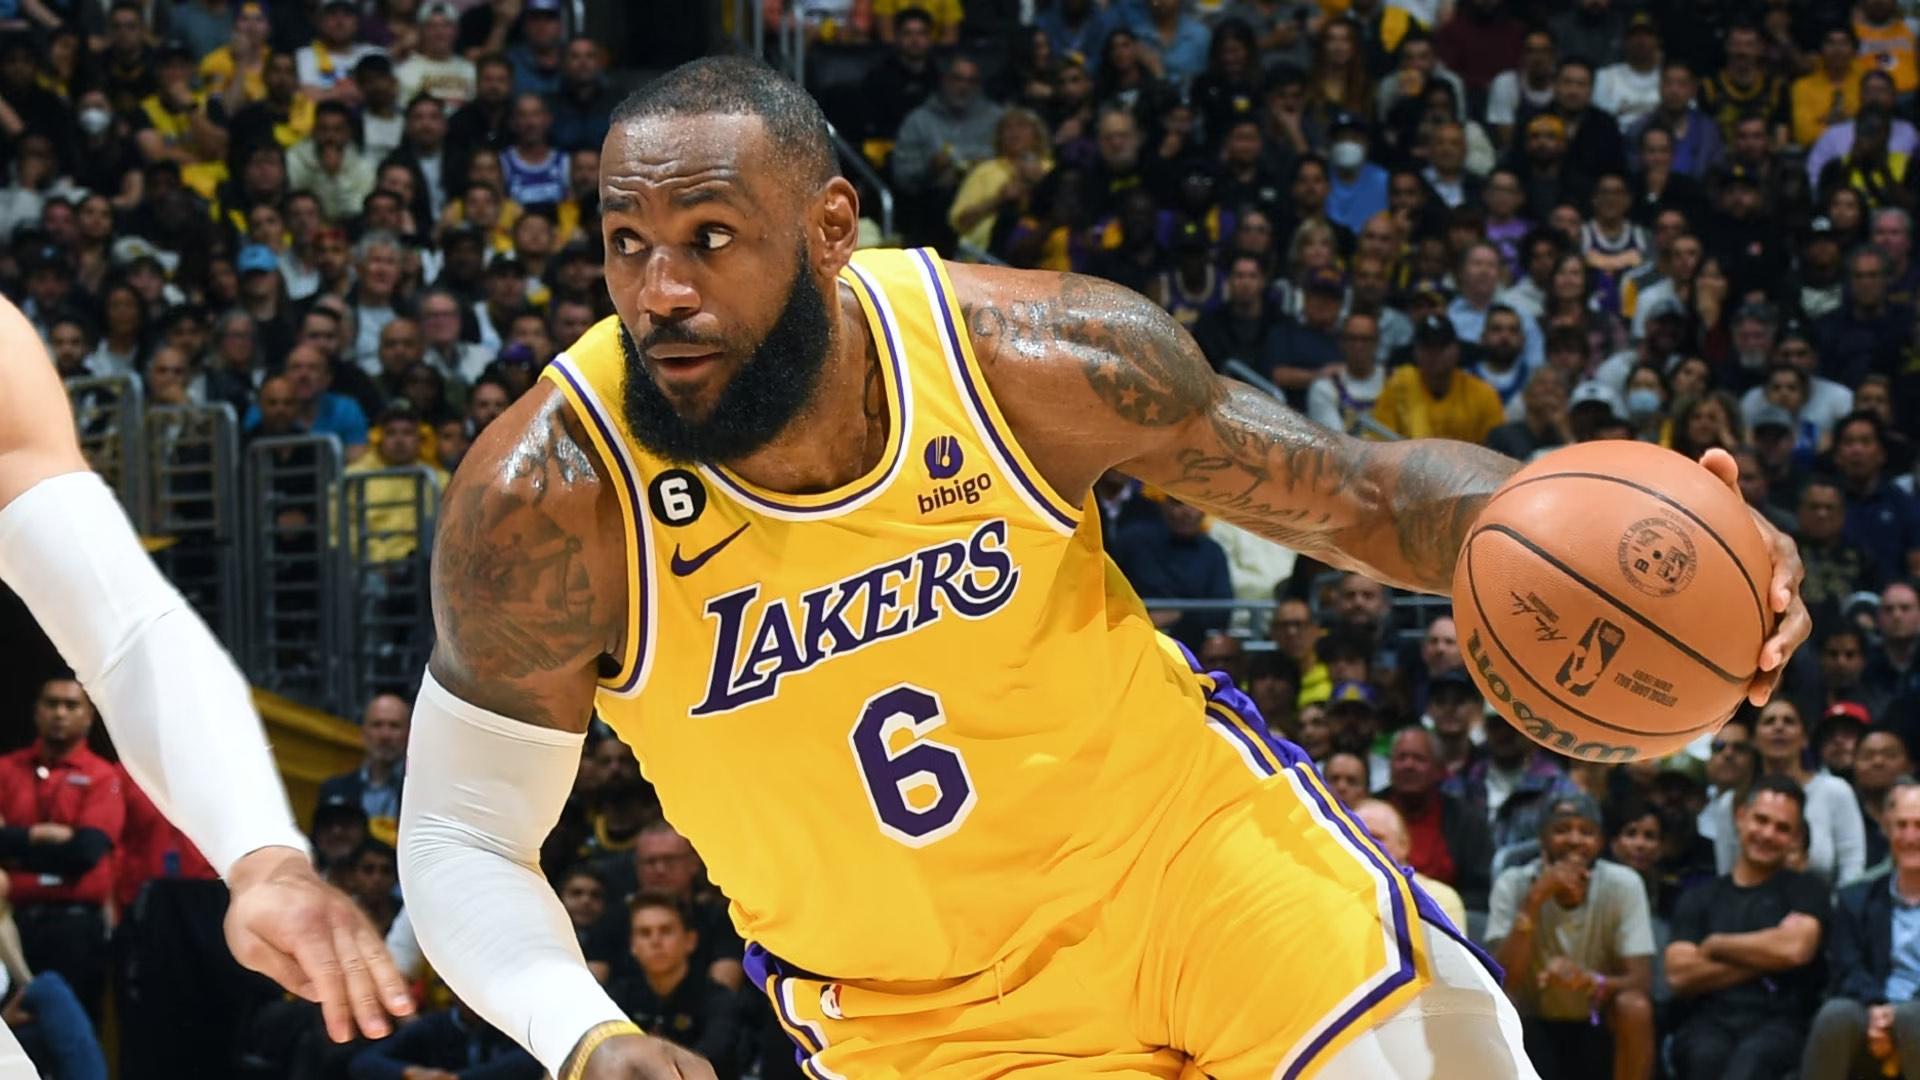 Tickets are now available to see basketball legend LeBron James in Abu Dhabi